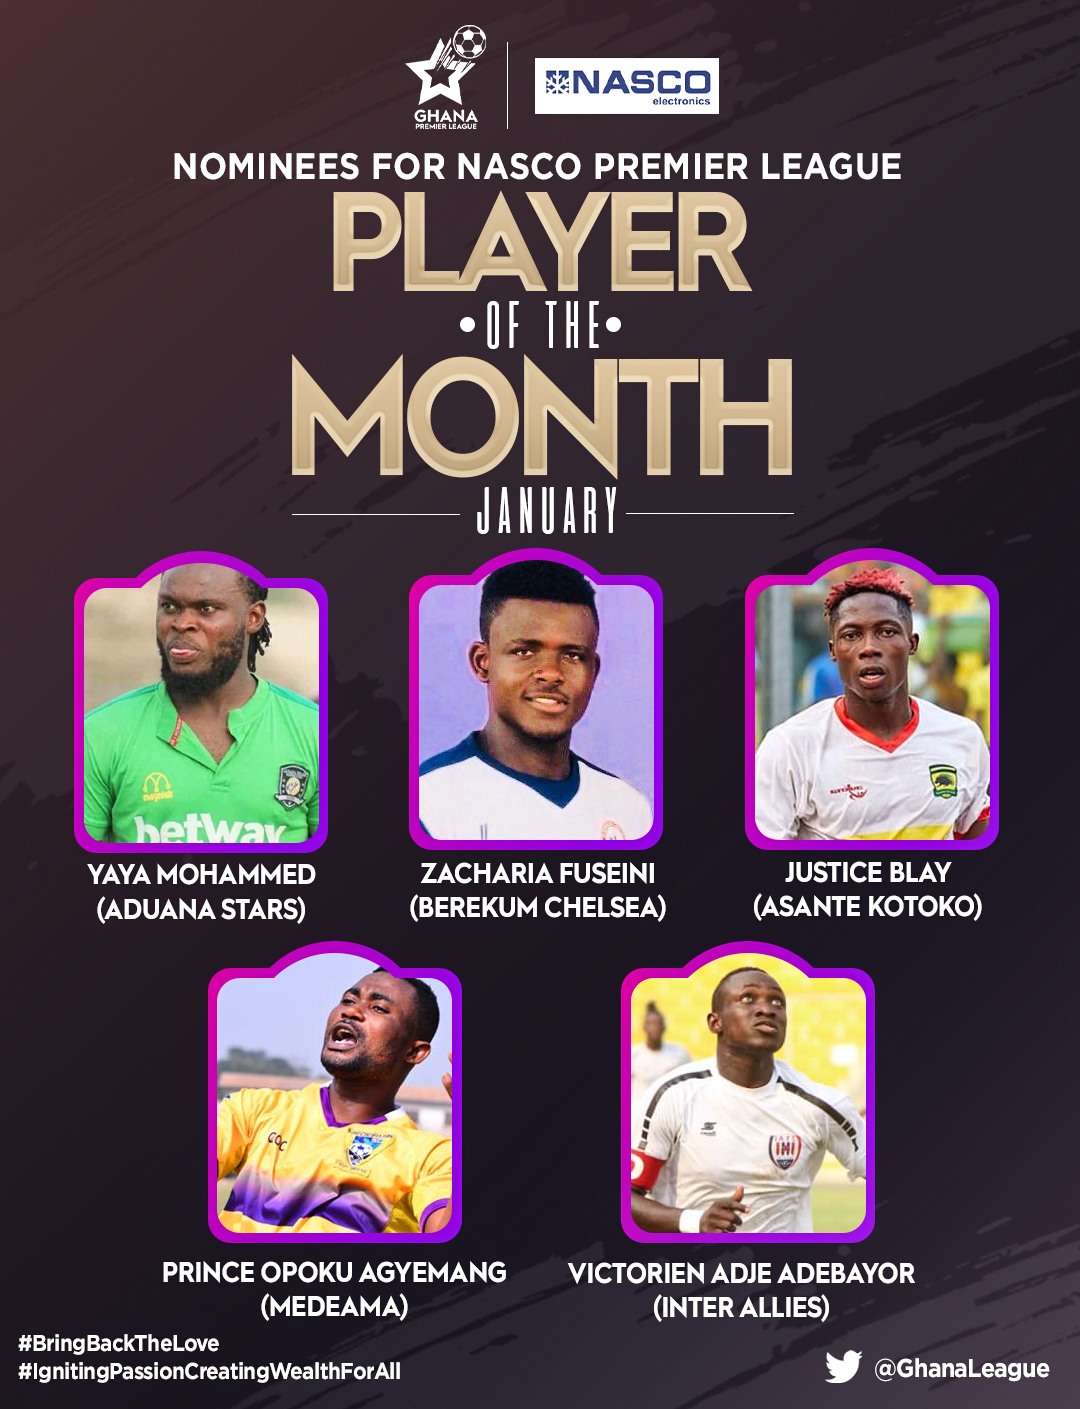 Nominees for Nasco Premier League Player and Coach of the Month announced